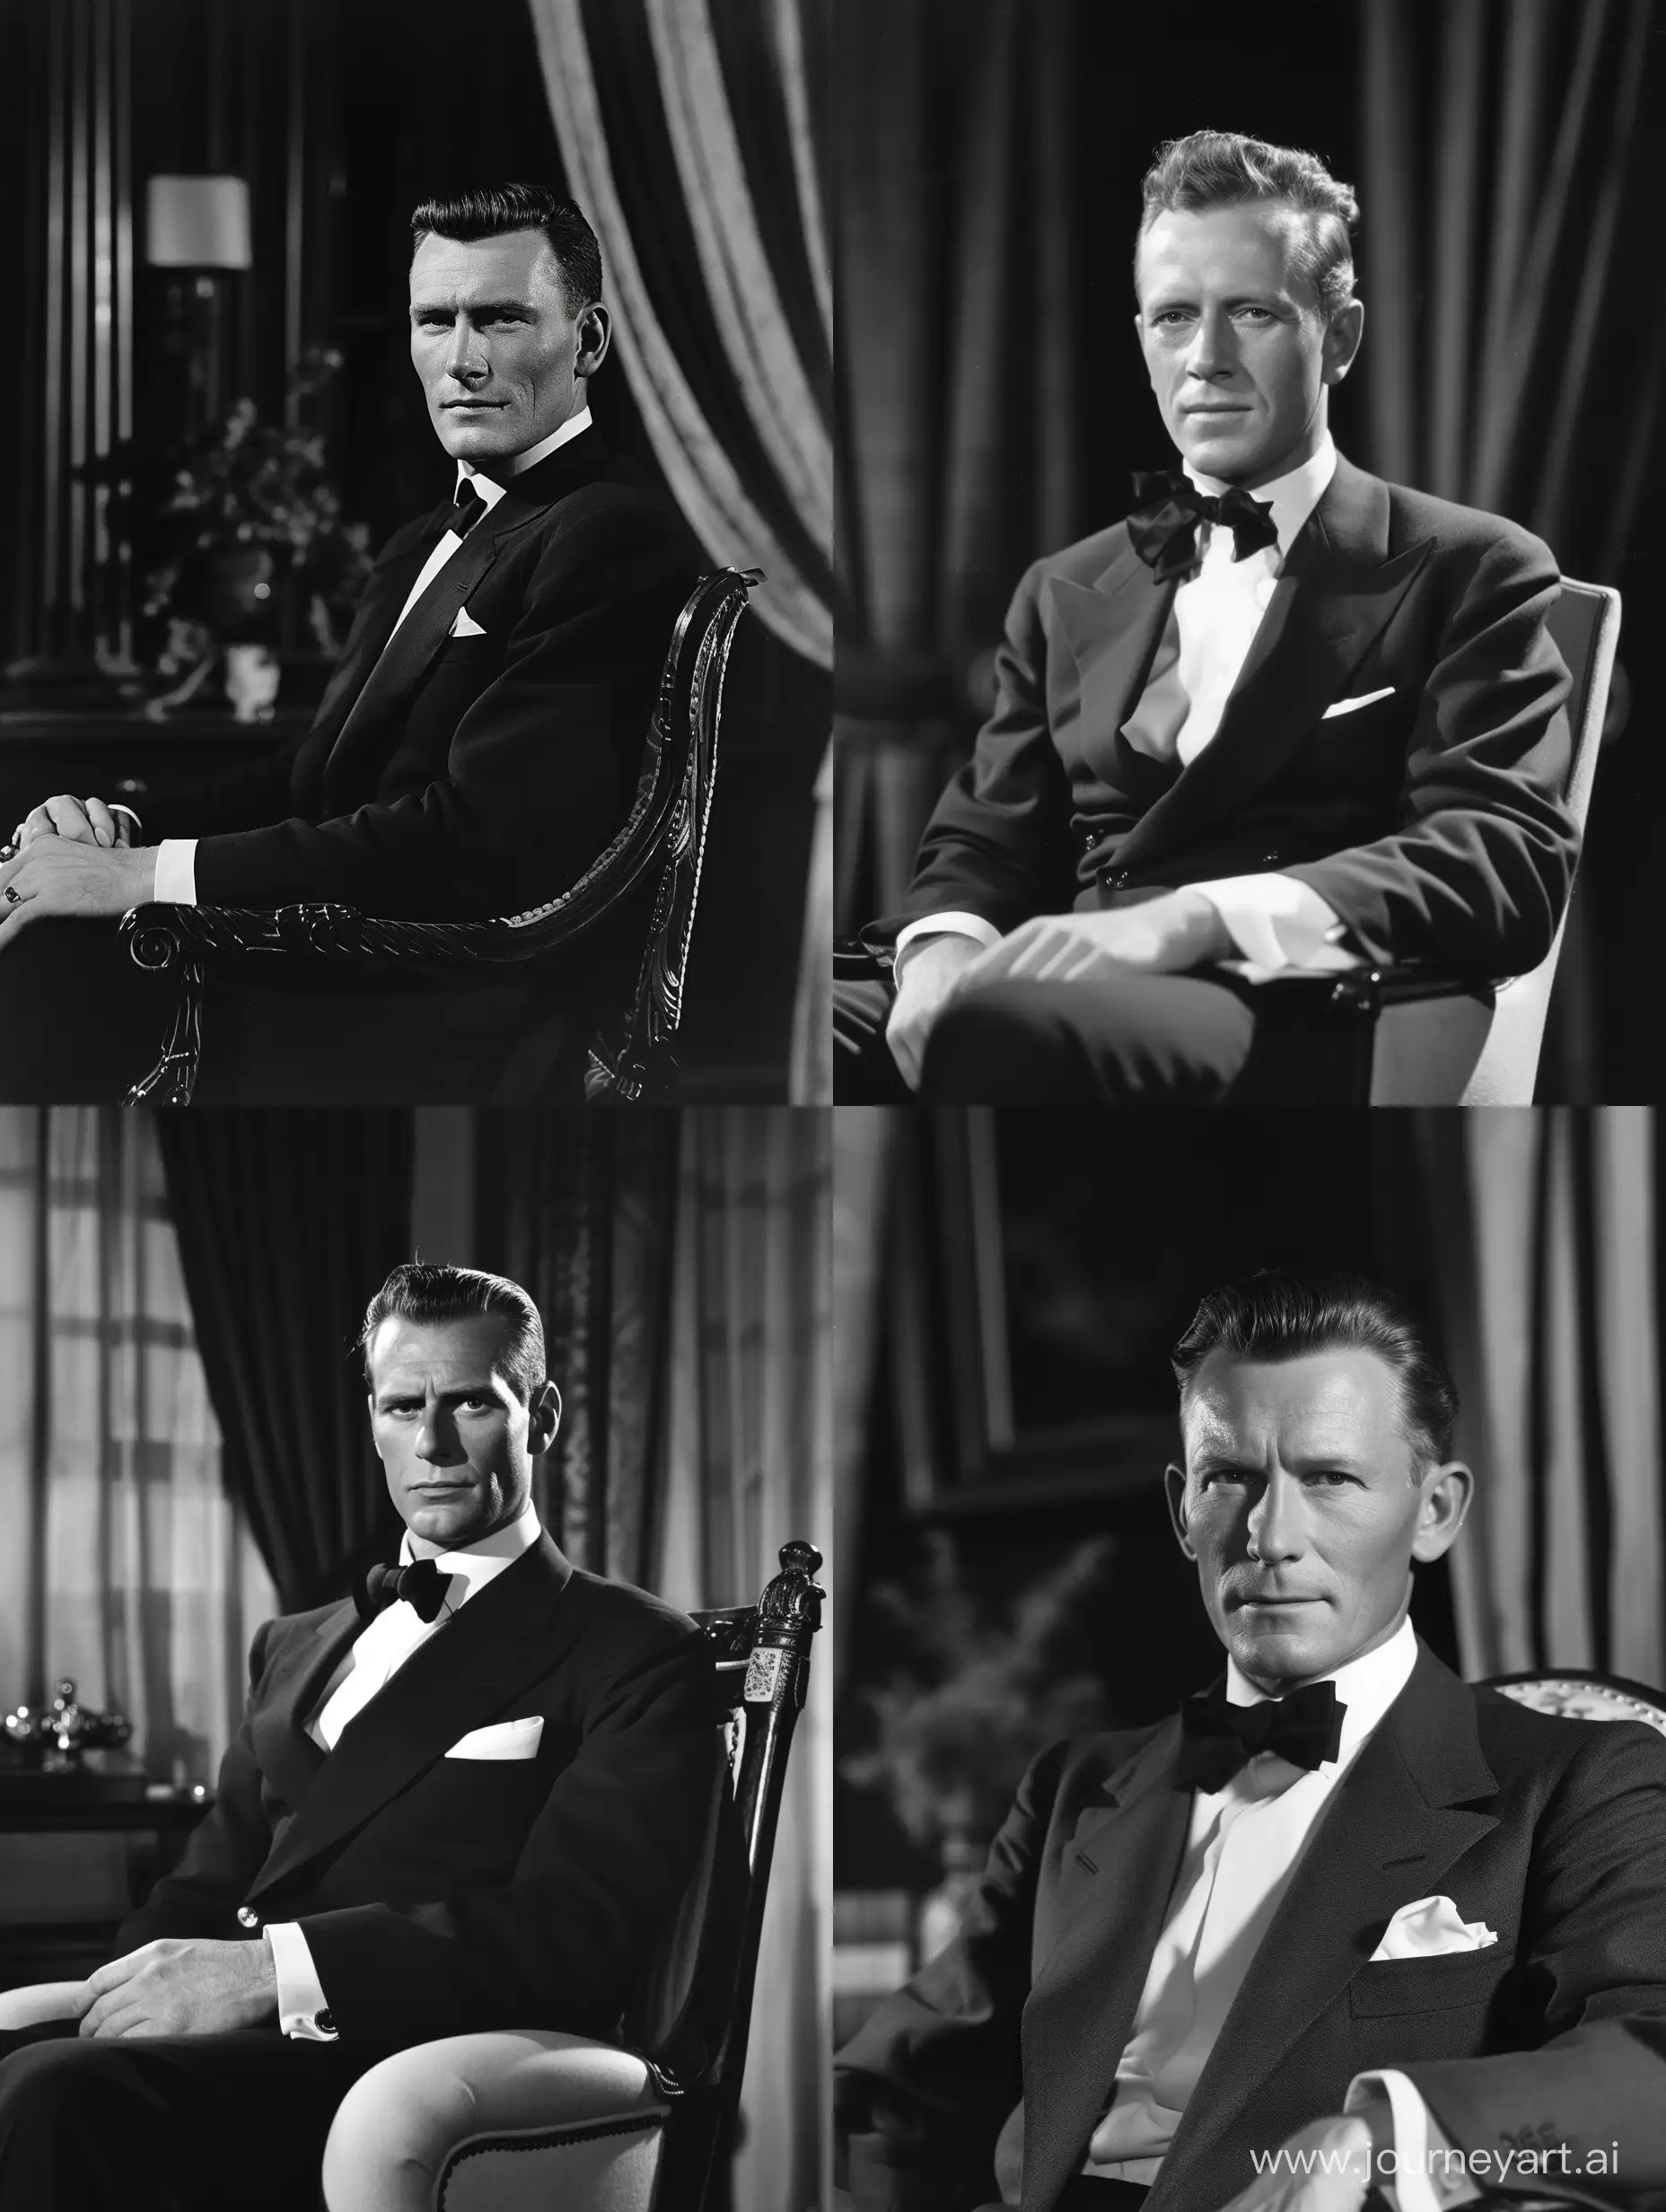 A 50-year-old man, tall man, former military, short hair, sitting in a chair, facing the camera, wearing formal attire, black and white photo from the 1950s. 